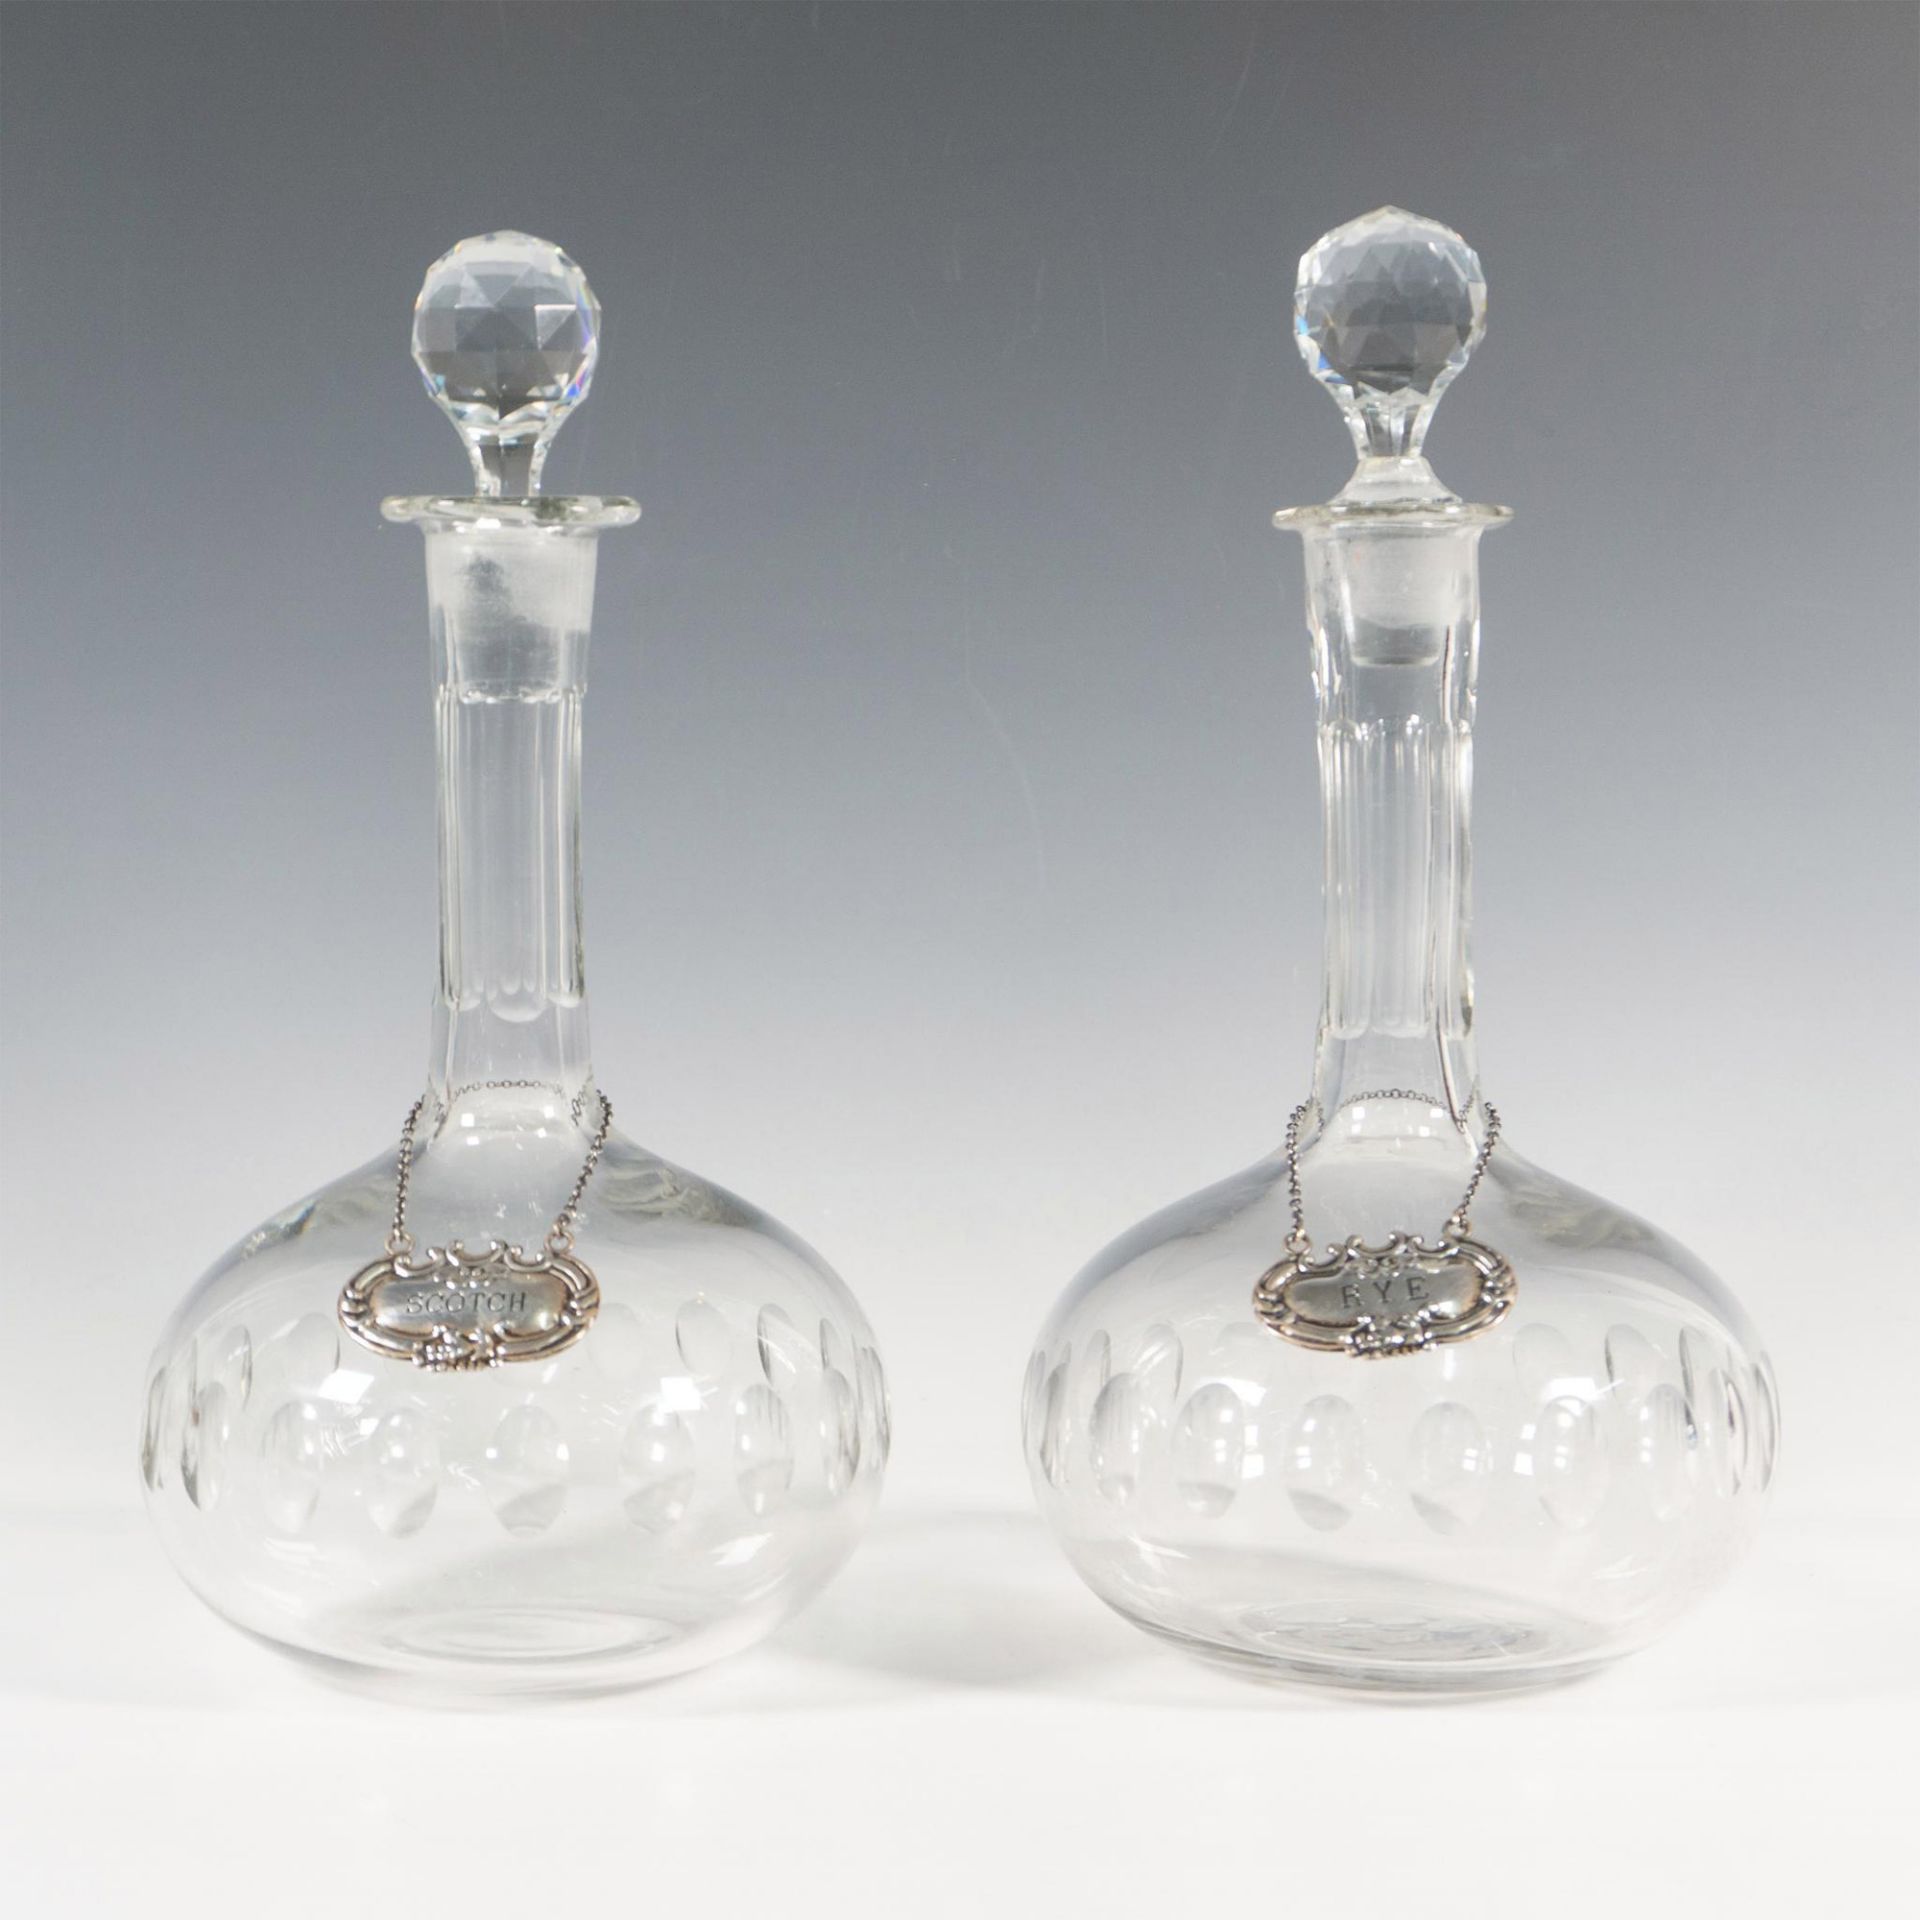 2pc Glass Decanters with Sterling Silver Liquor Tags